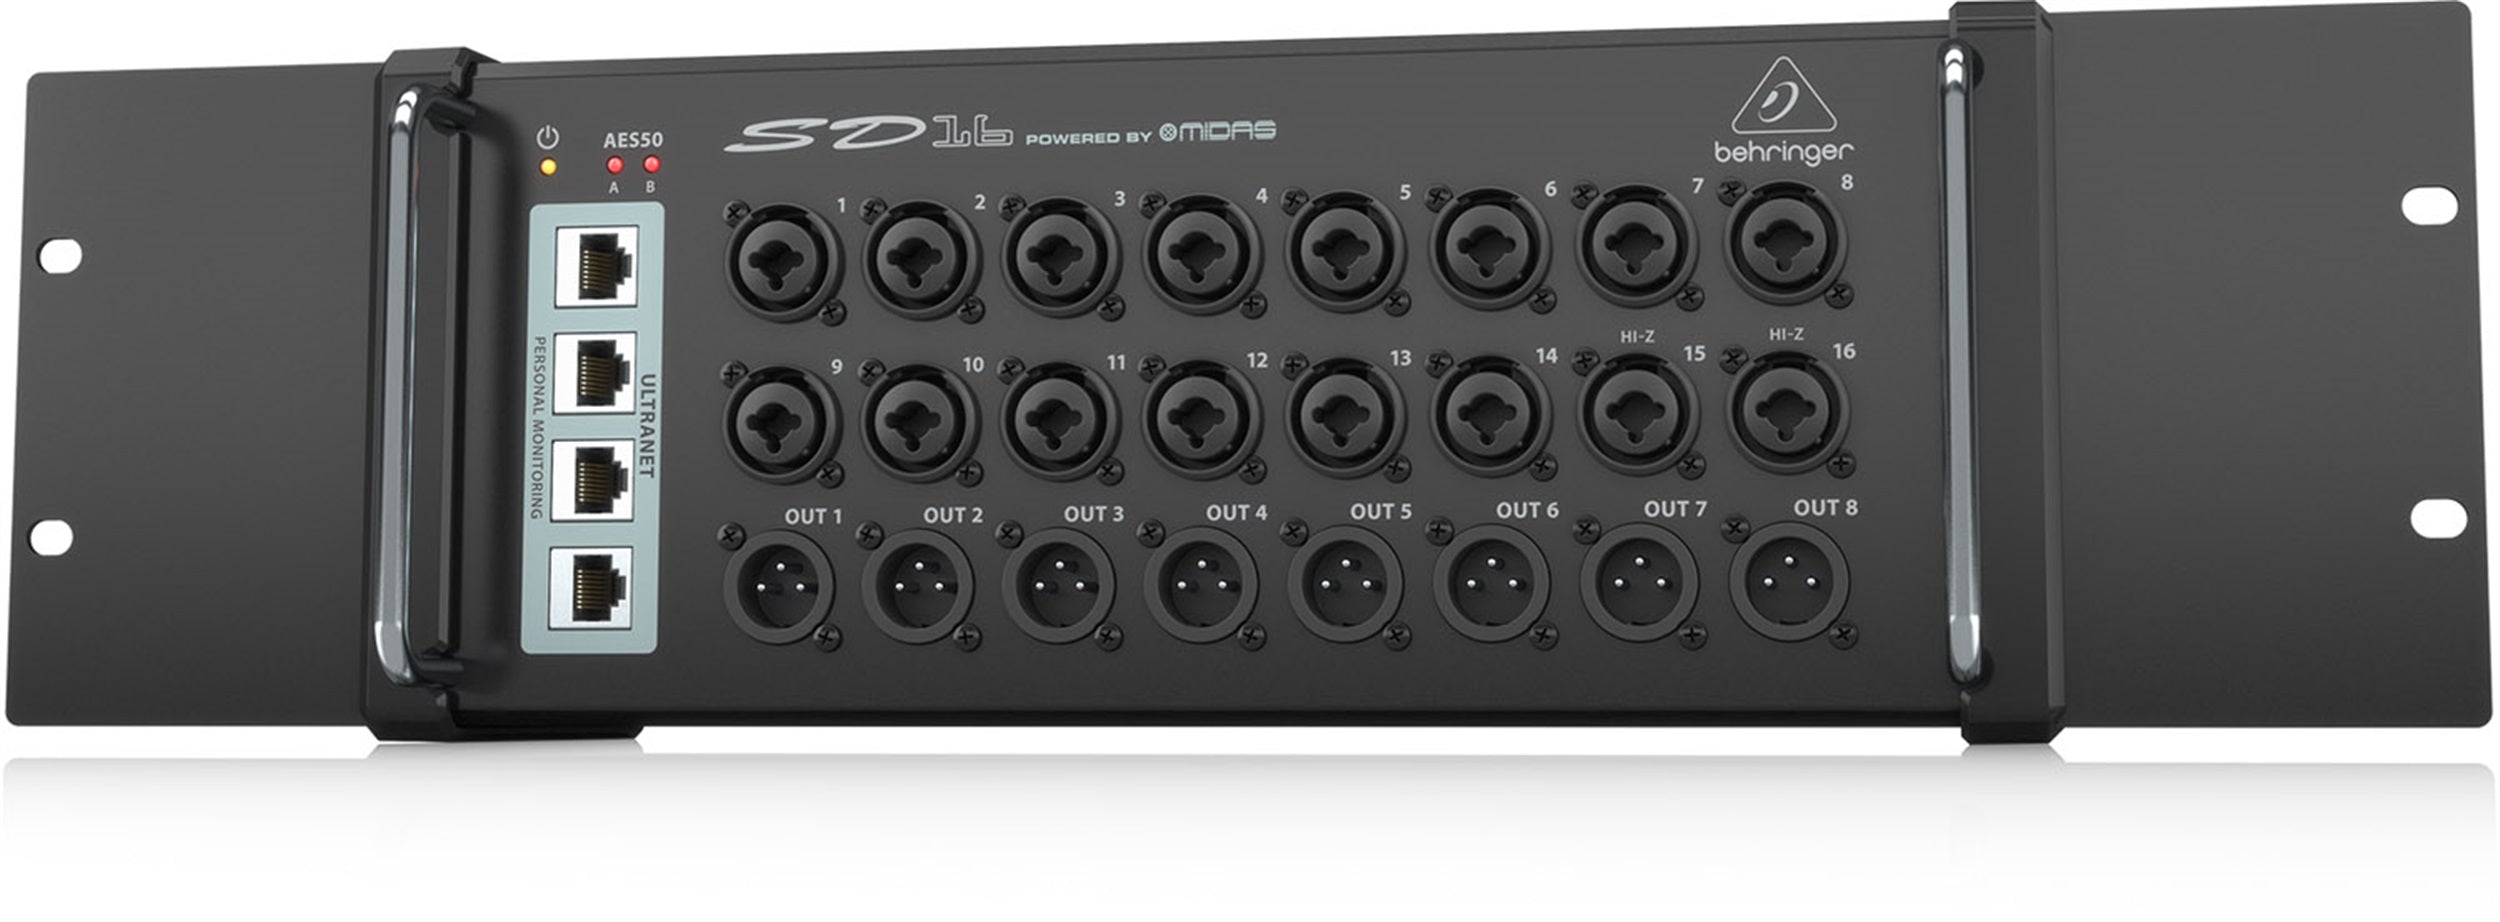 Behringer SD16, 8 Outputs Stage Box with 16 Remote-Controllable Midas Preamps by Behringer